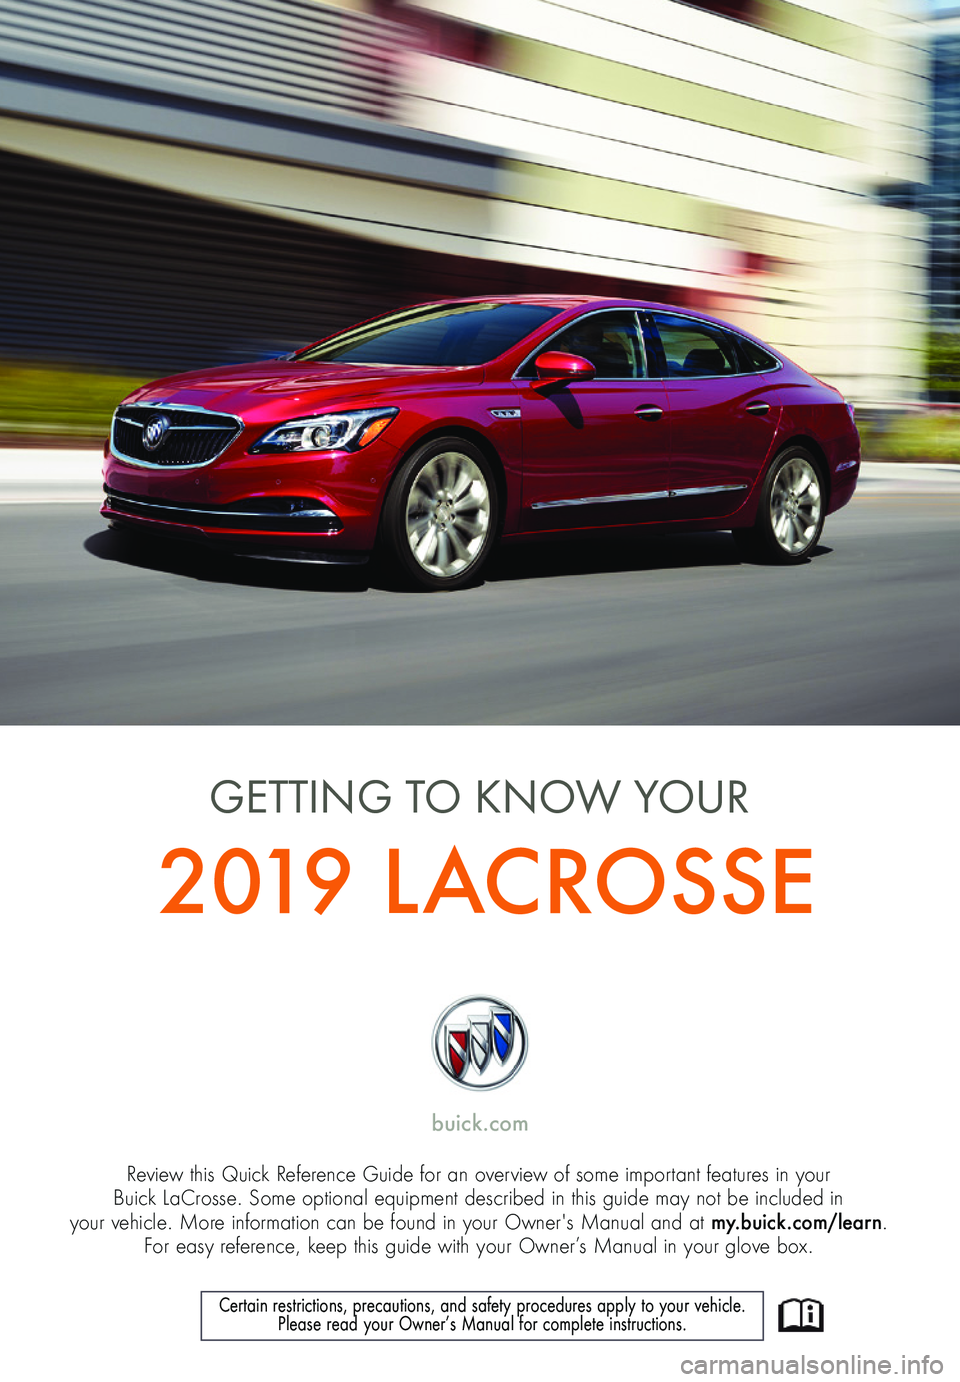 BUICK LACROSSE 2019  Get To Know Guide 1
Review this Quick Reference Guide for an overview of some important features in your  Buick LaCrosse. Some optional equipment described in this guide may not be included in  your vehicle. More infor